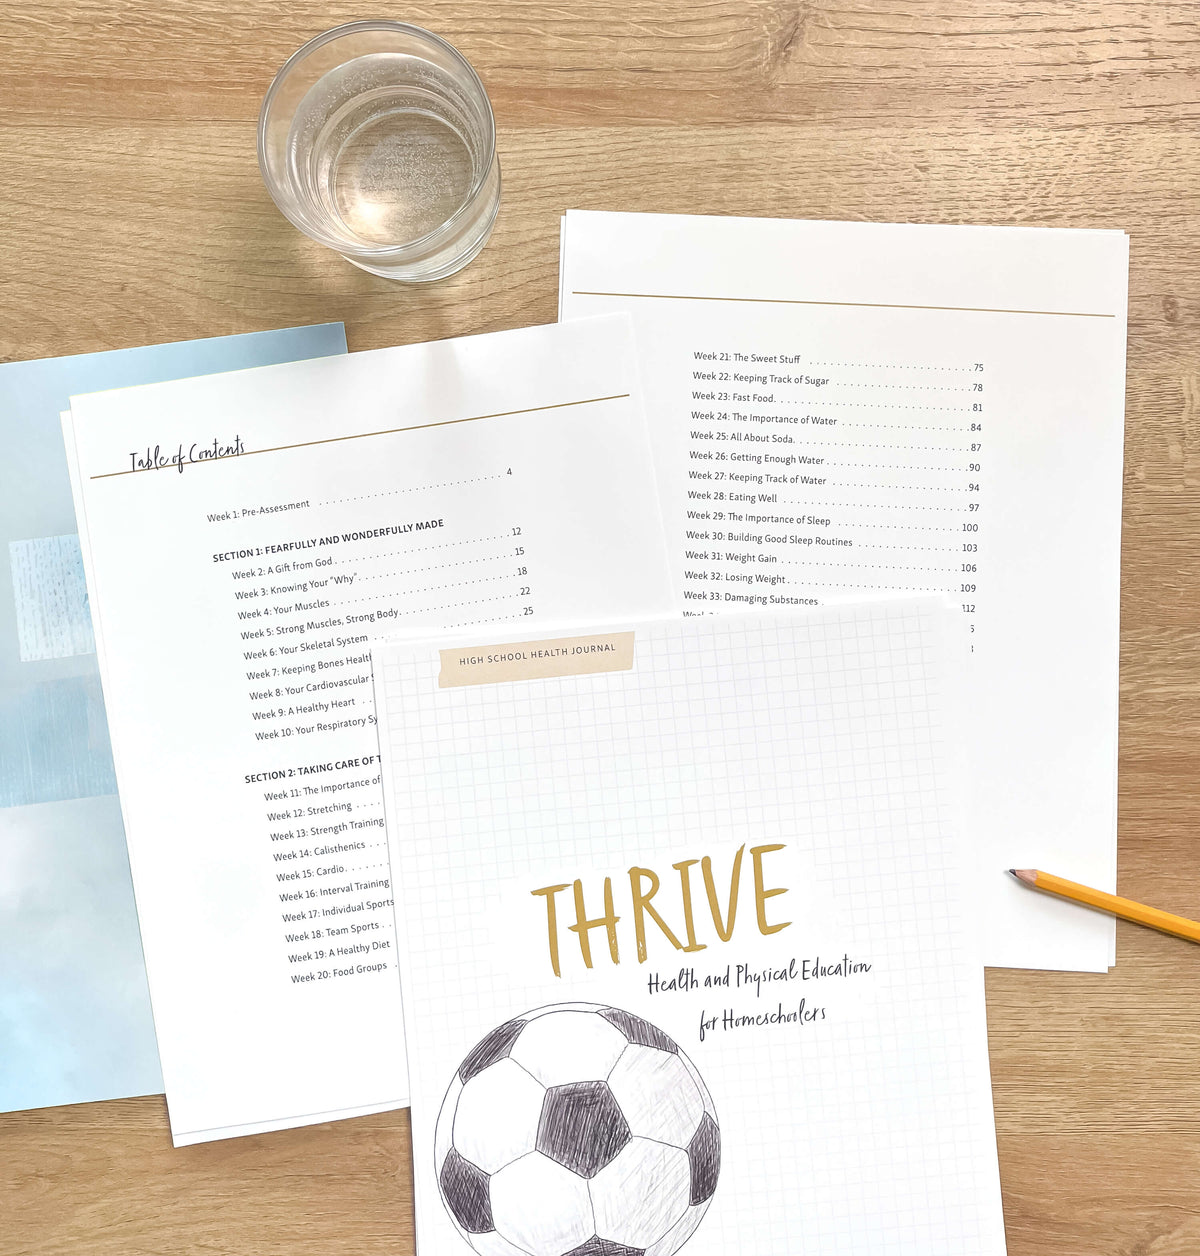 Thrive: Health and Physical Education for Homeschoolers (Digital Site License)